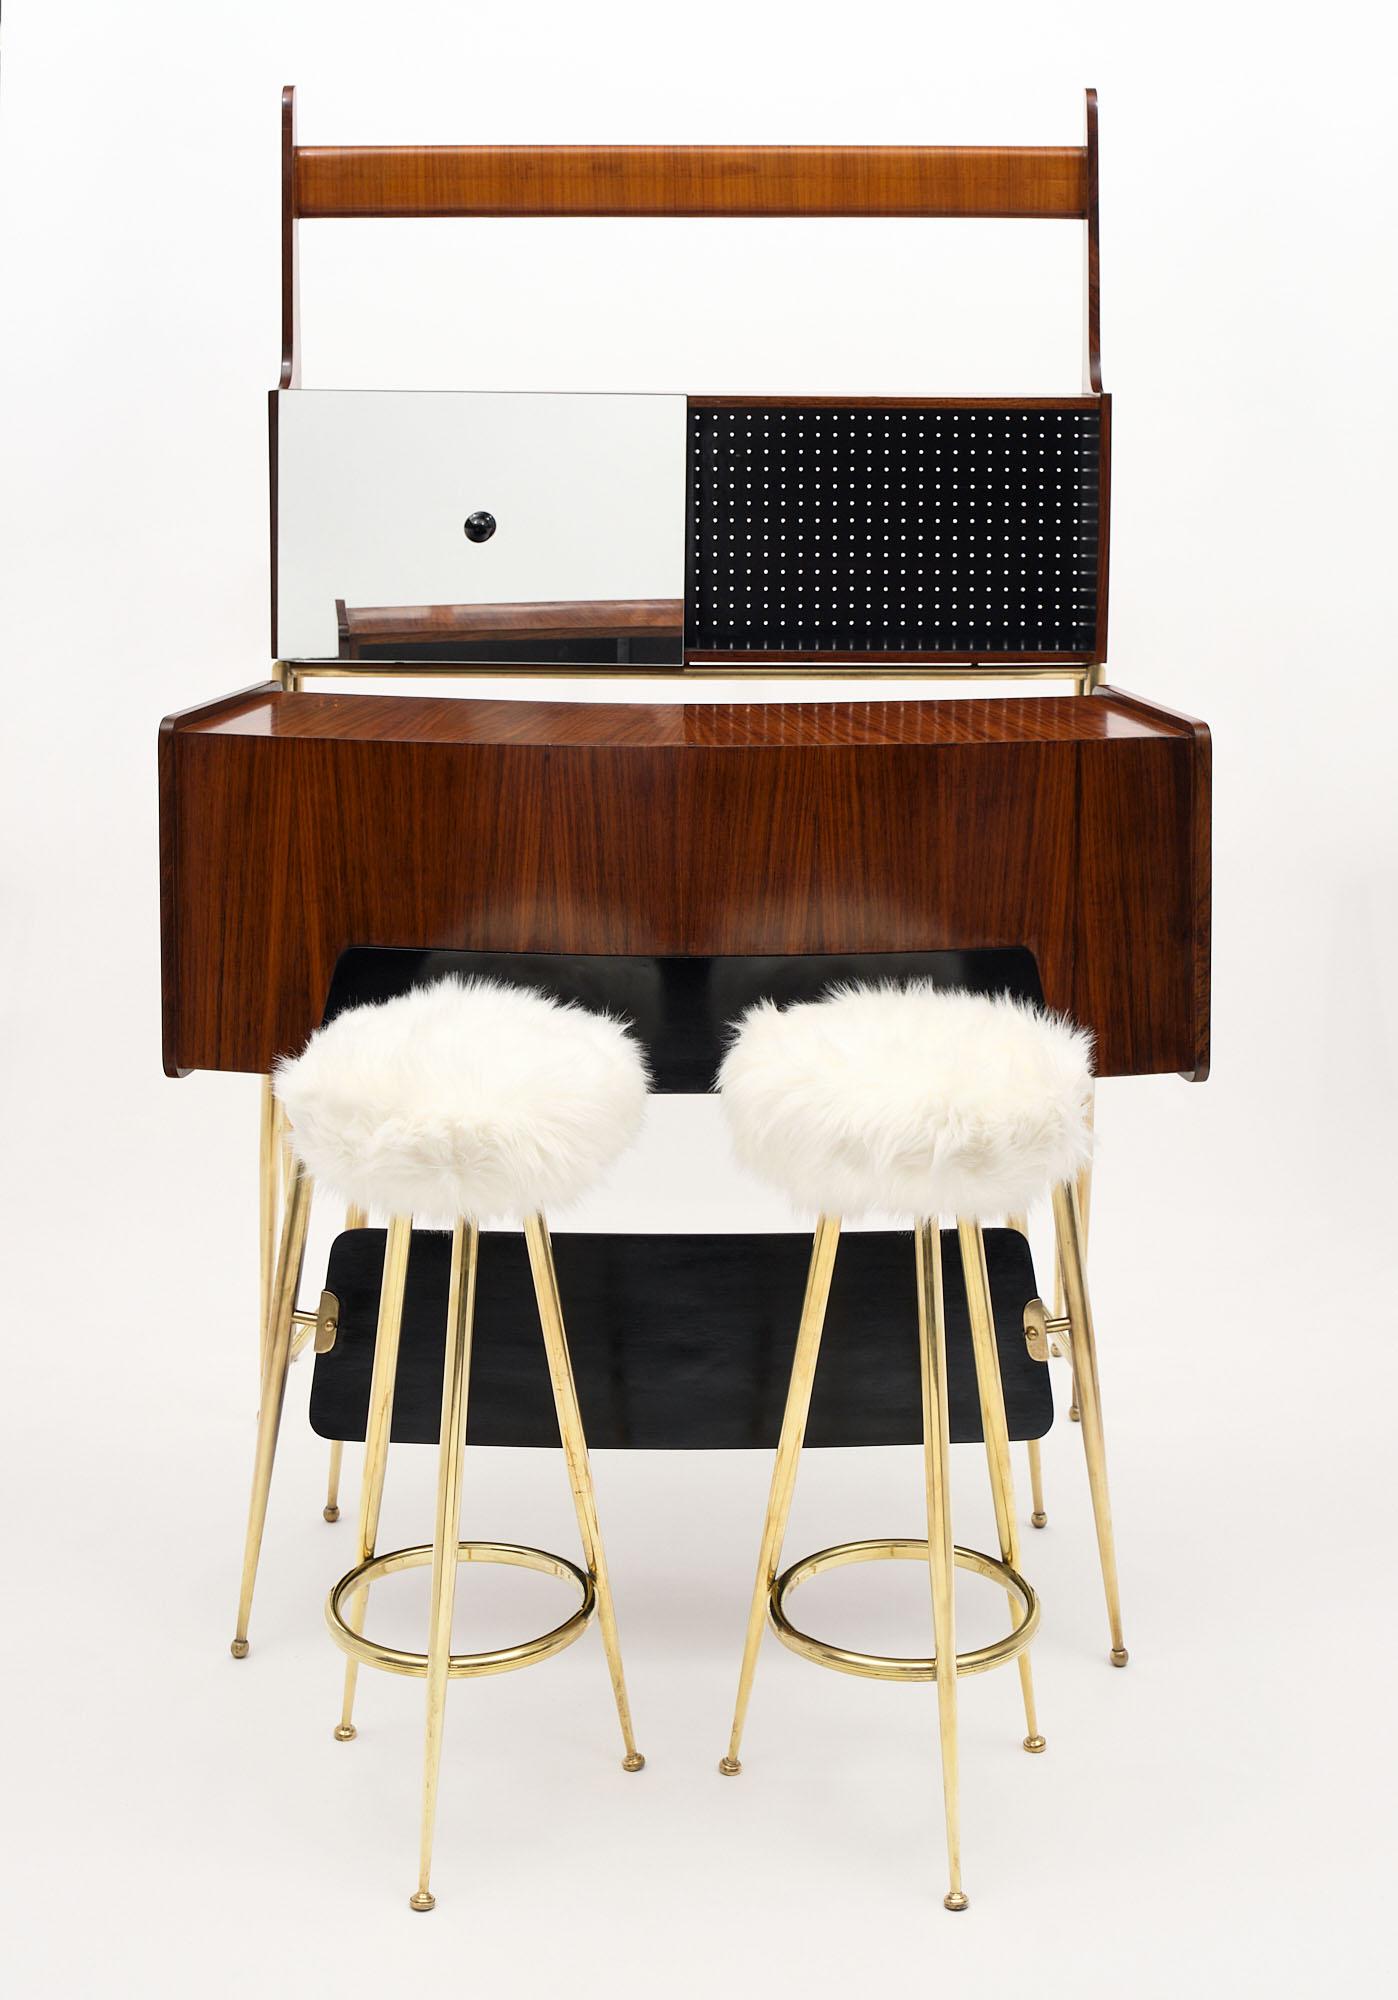 Bar; Italian; made of mahogany and brass. The ensemble features a case on brass legs with a glass shelf and a sliding mirrored door on top; a bar on brass legs of rosewood; and two brass stools upholstered in ivory toned shag fabric. The